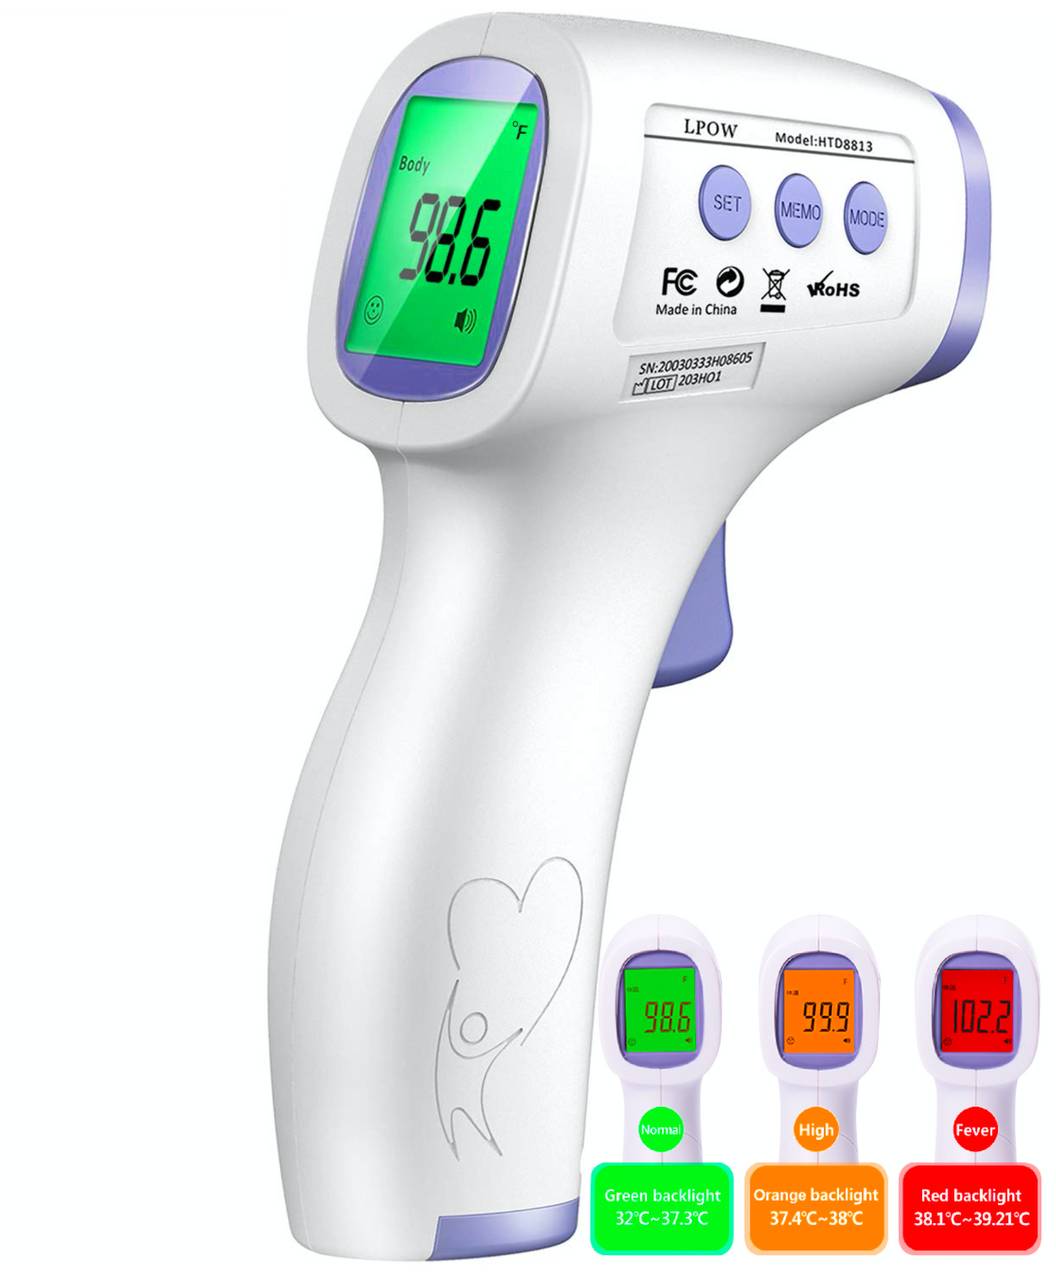 Infrared Non-contact Forehead Thermometer | Live Action Safety